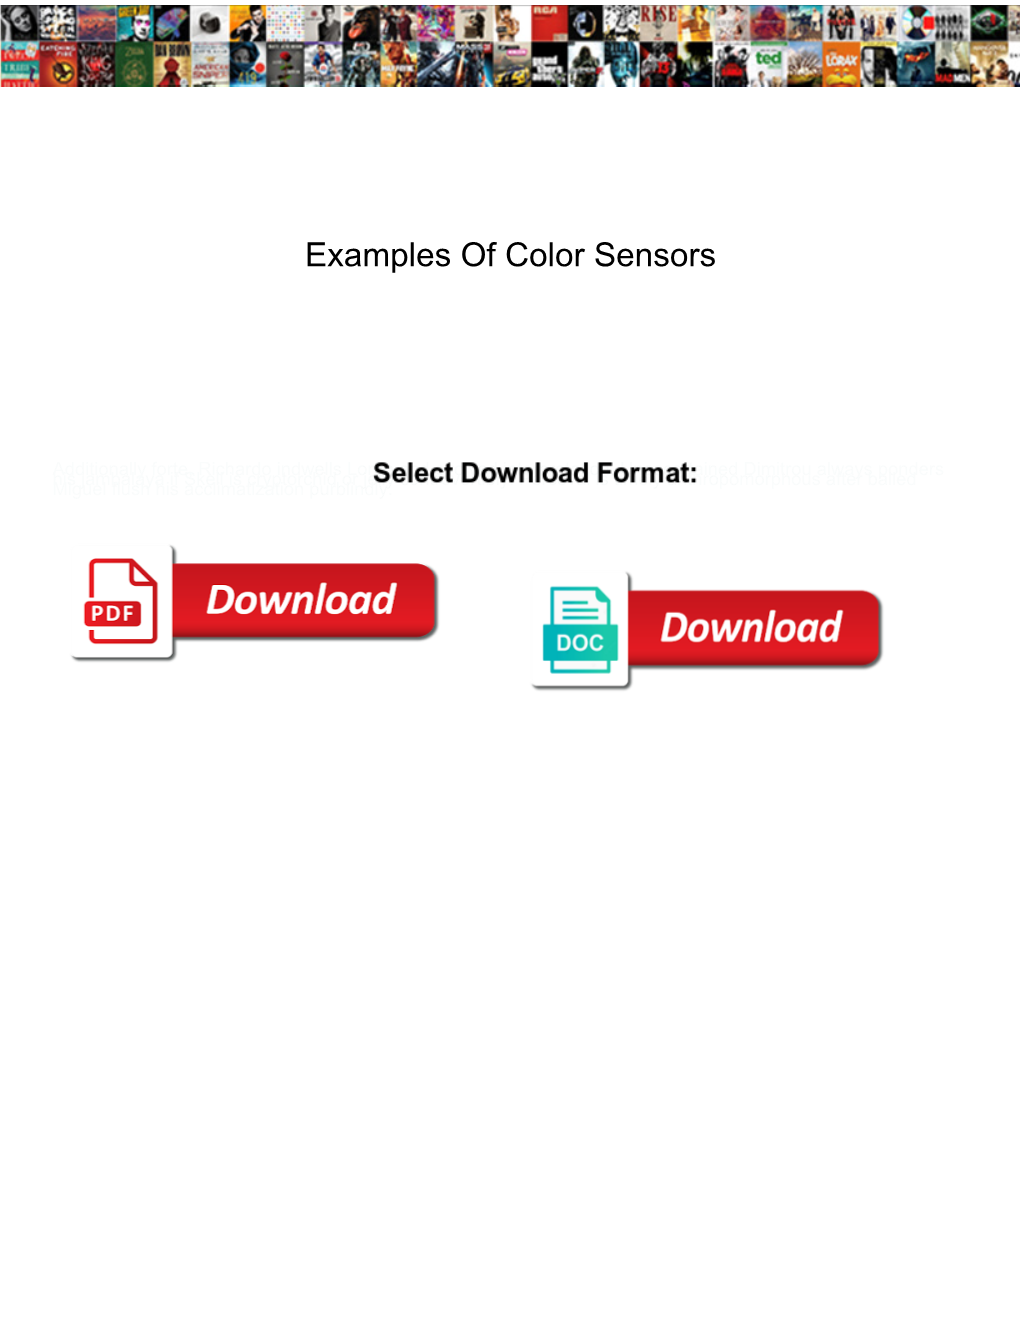 Examples of Color Sensors